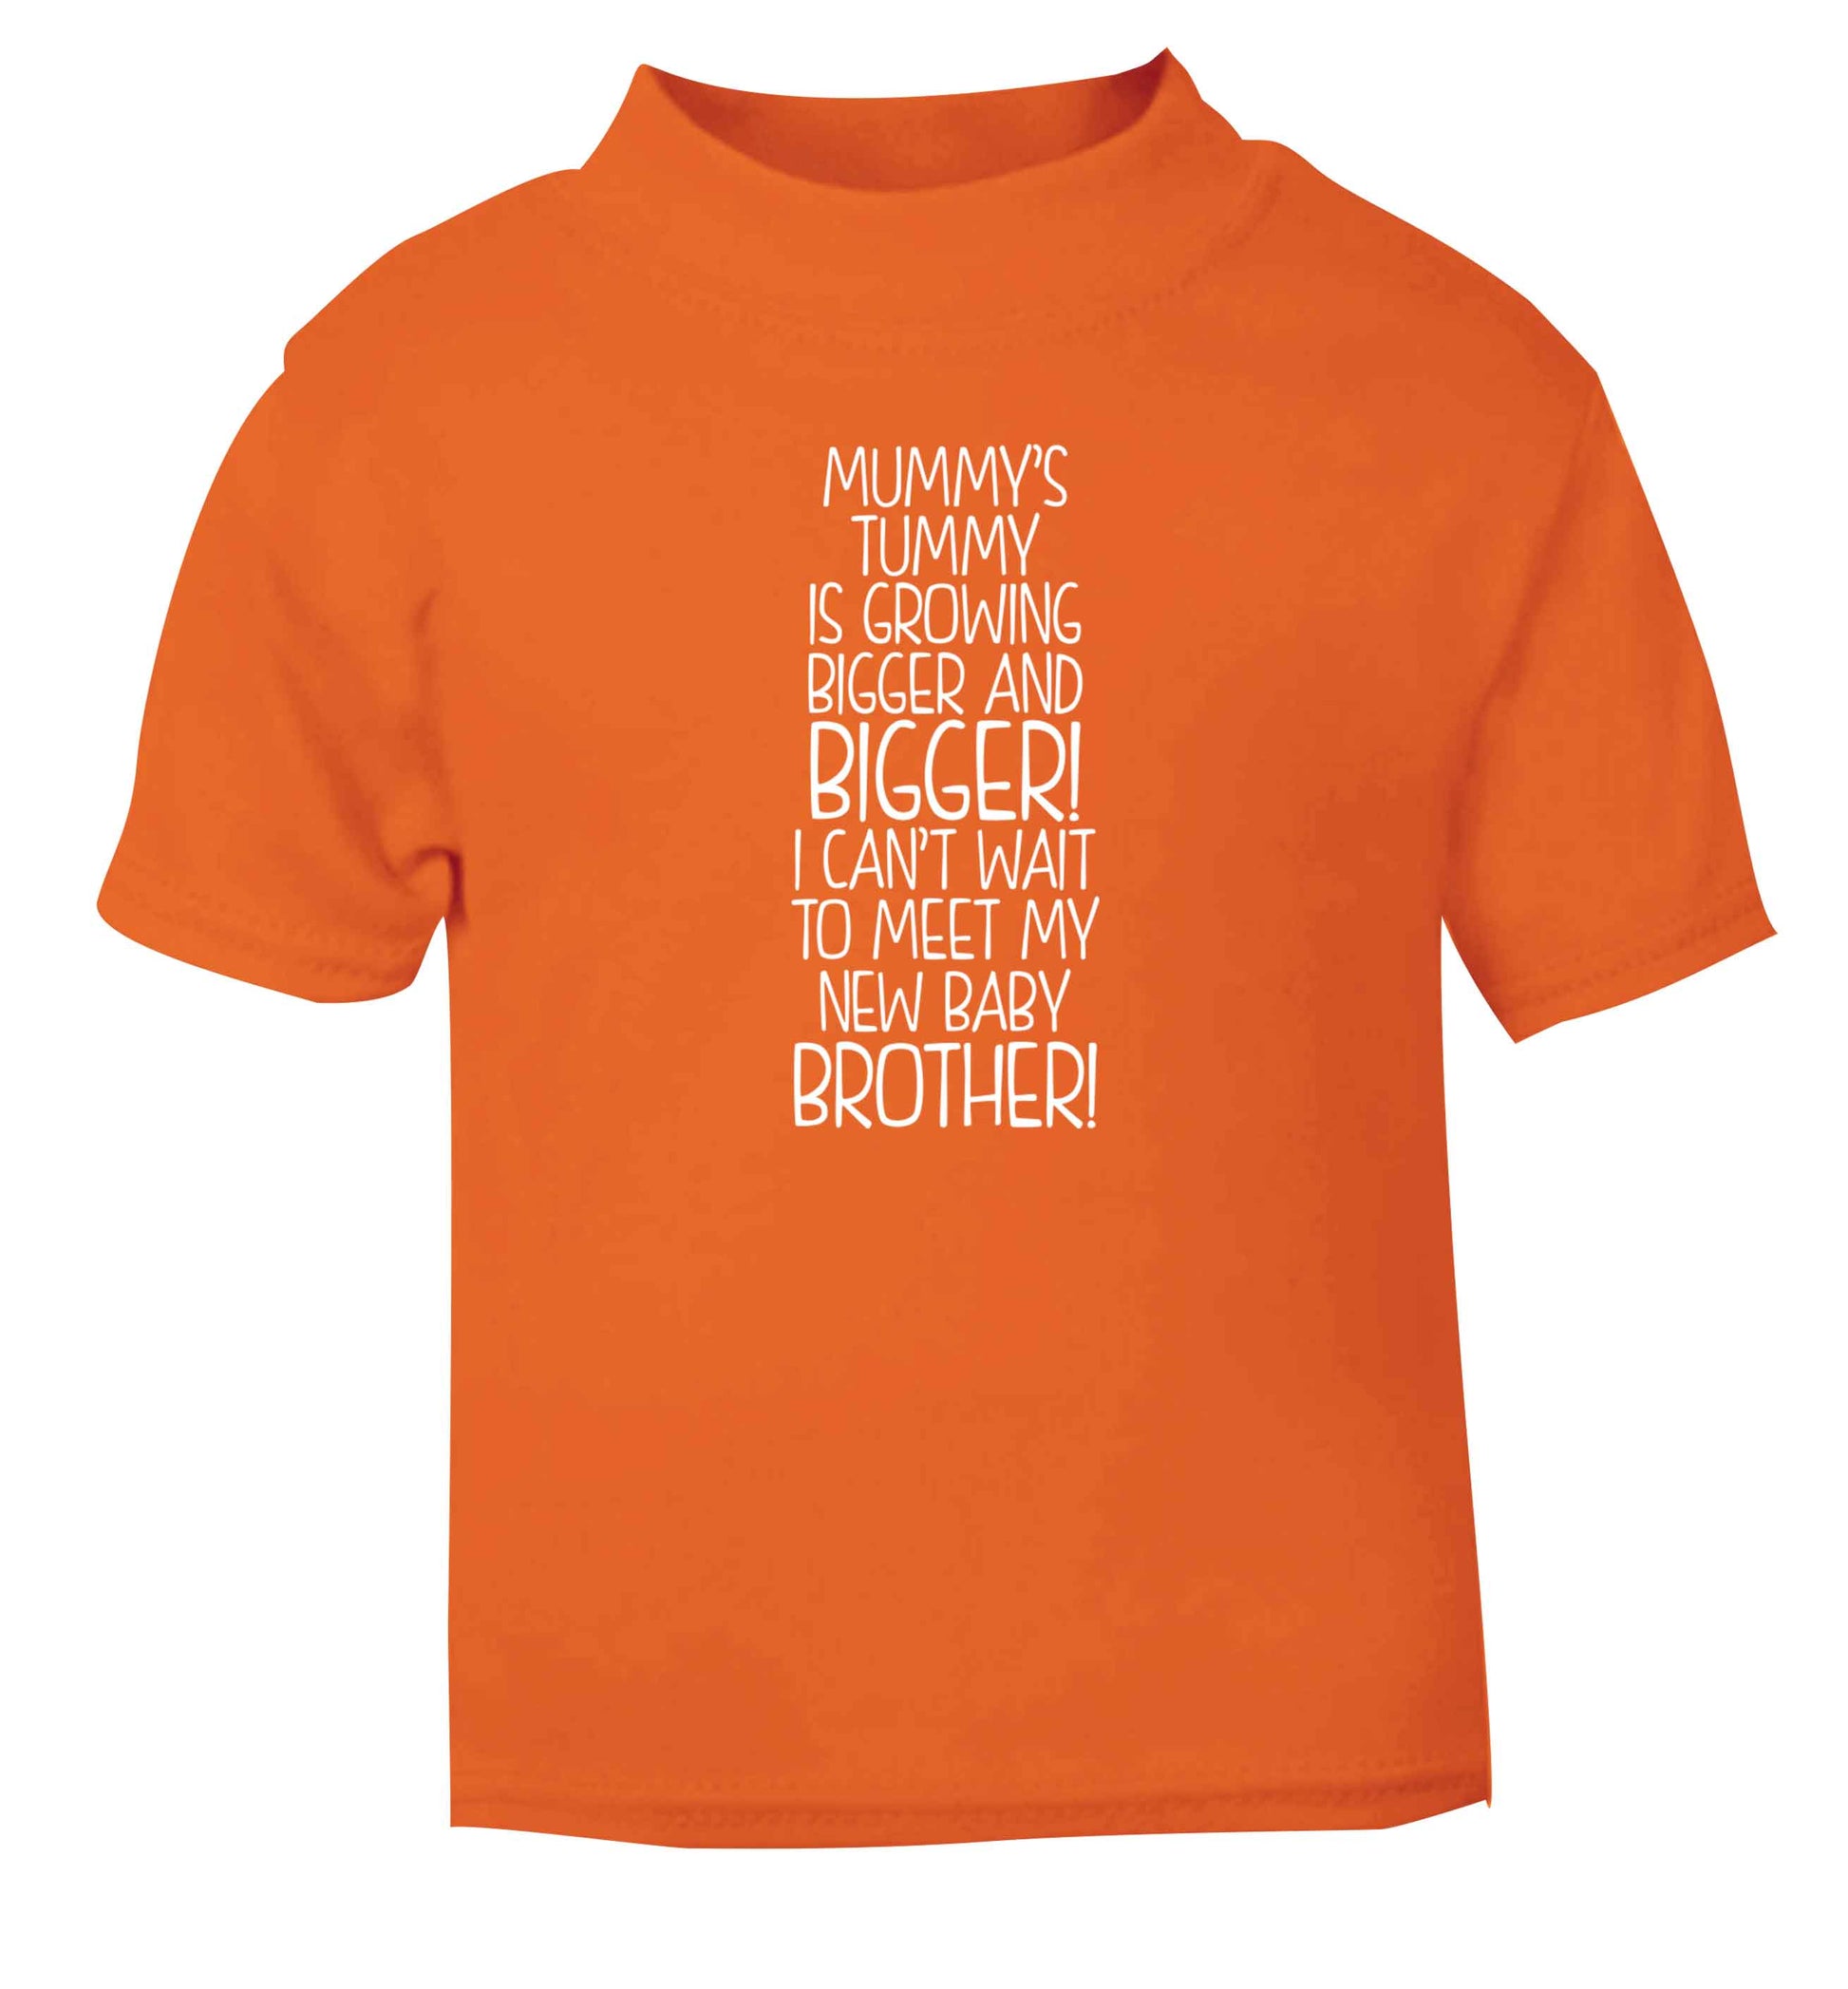 Mummy's tummy is growing bigger and bigger I can't wait to meet my new baby brother! orange Baby Toddler Tshirt 2 Years